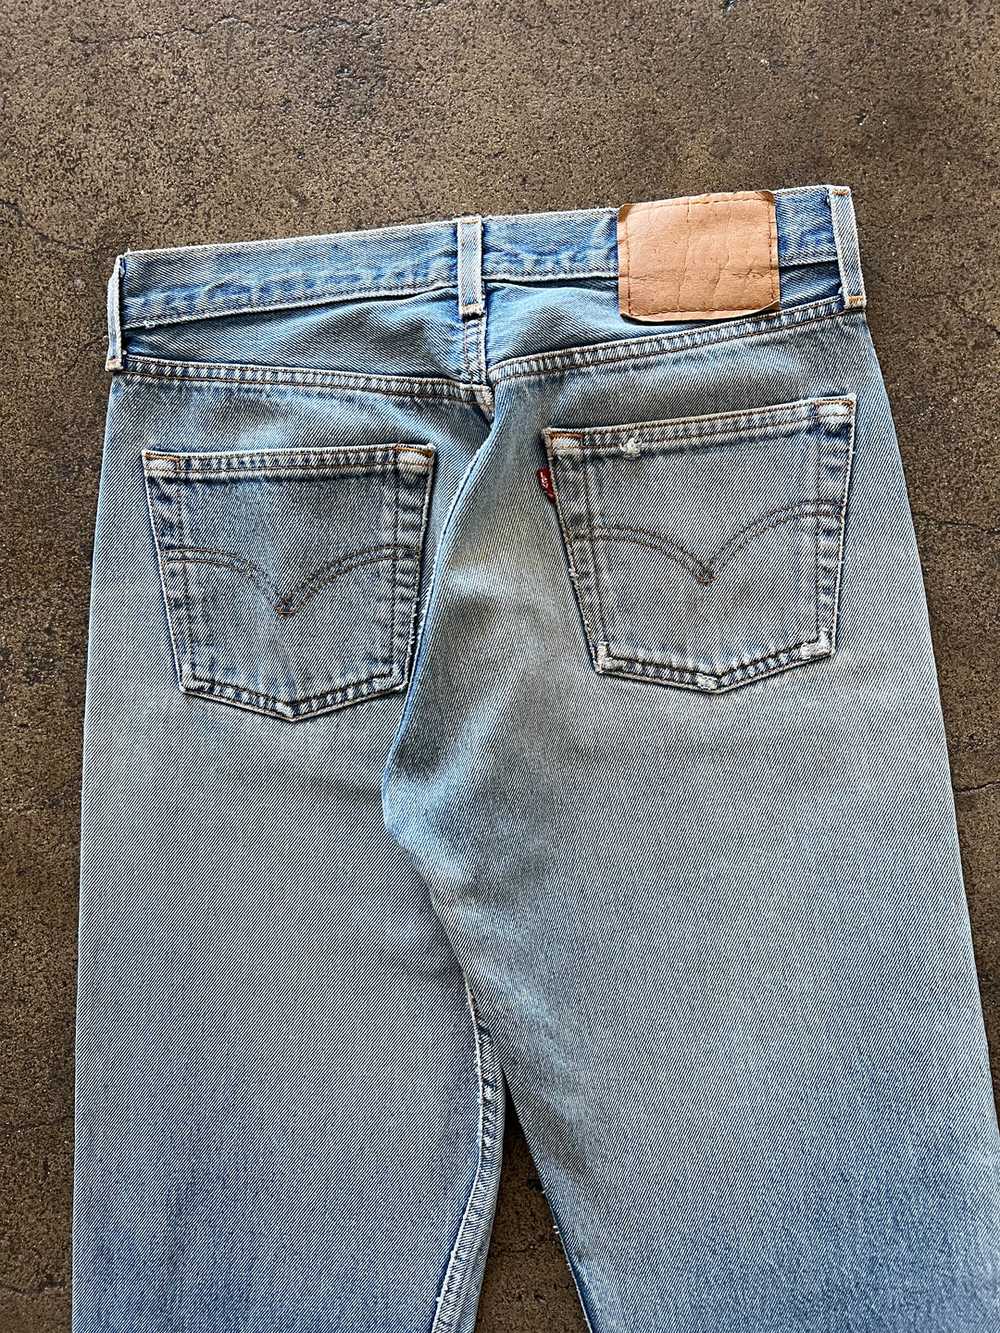 2000s Levi's 501 Jeans Faded 29" x 29" - image 5